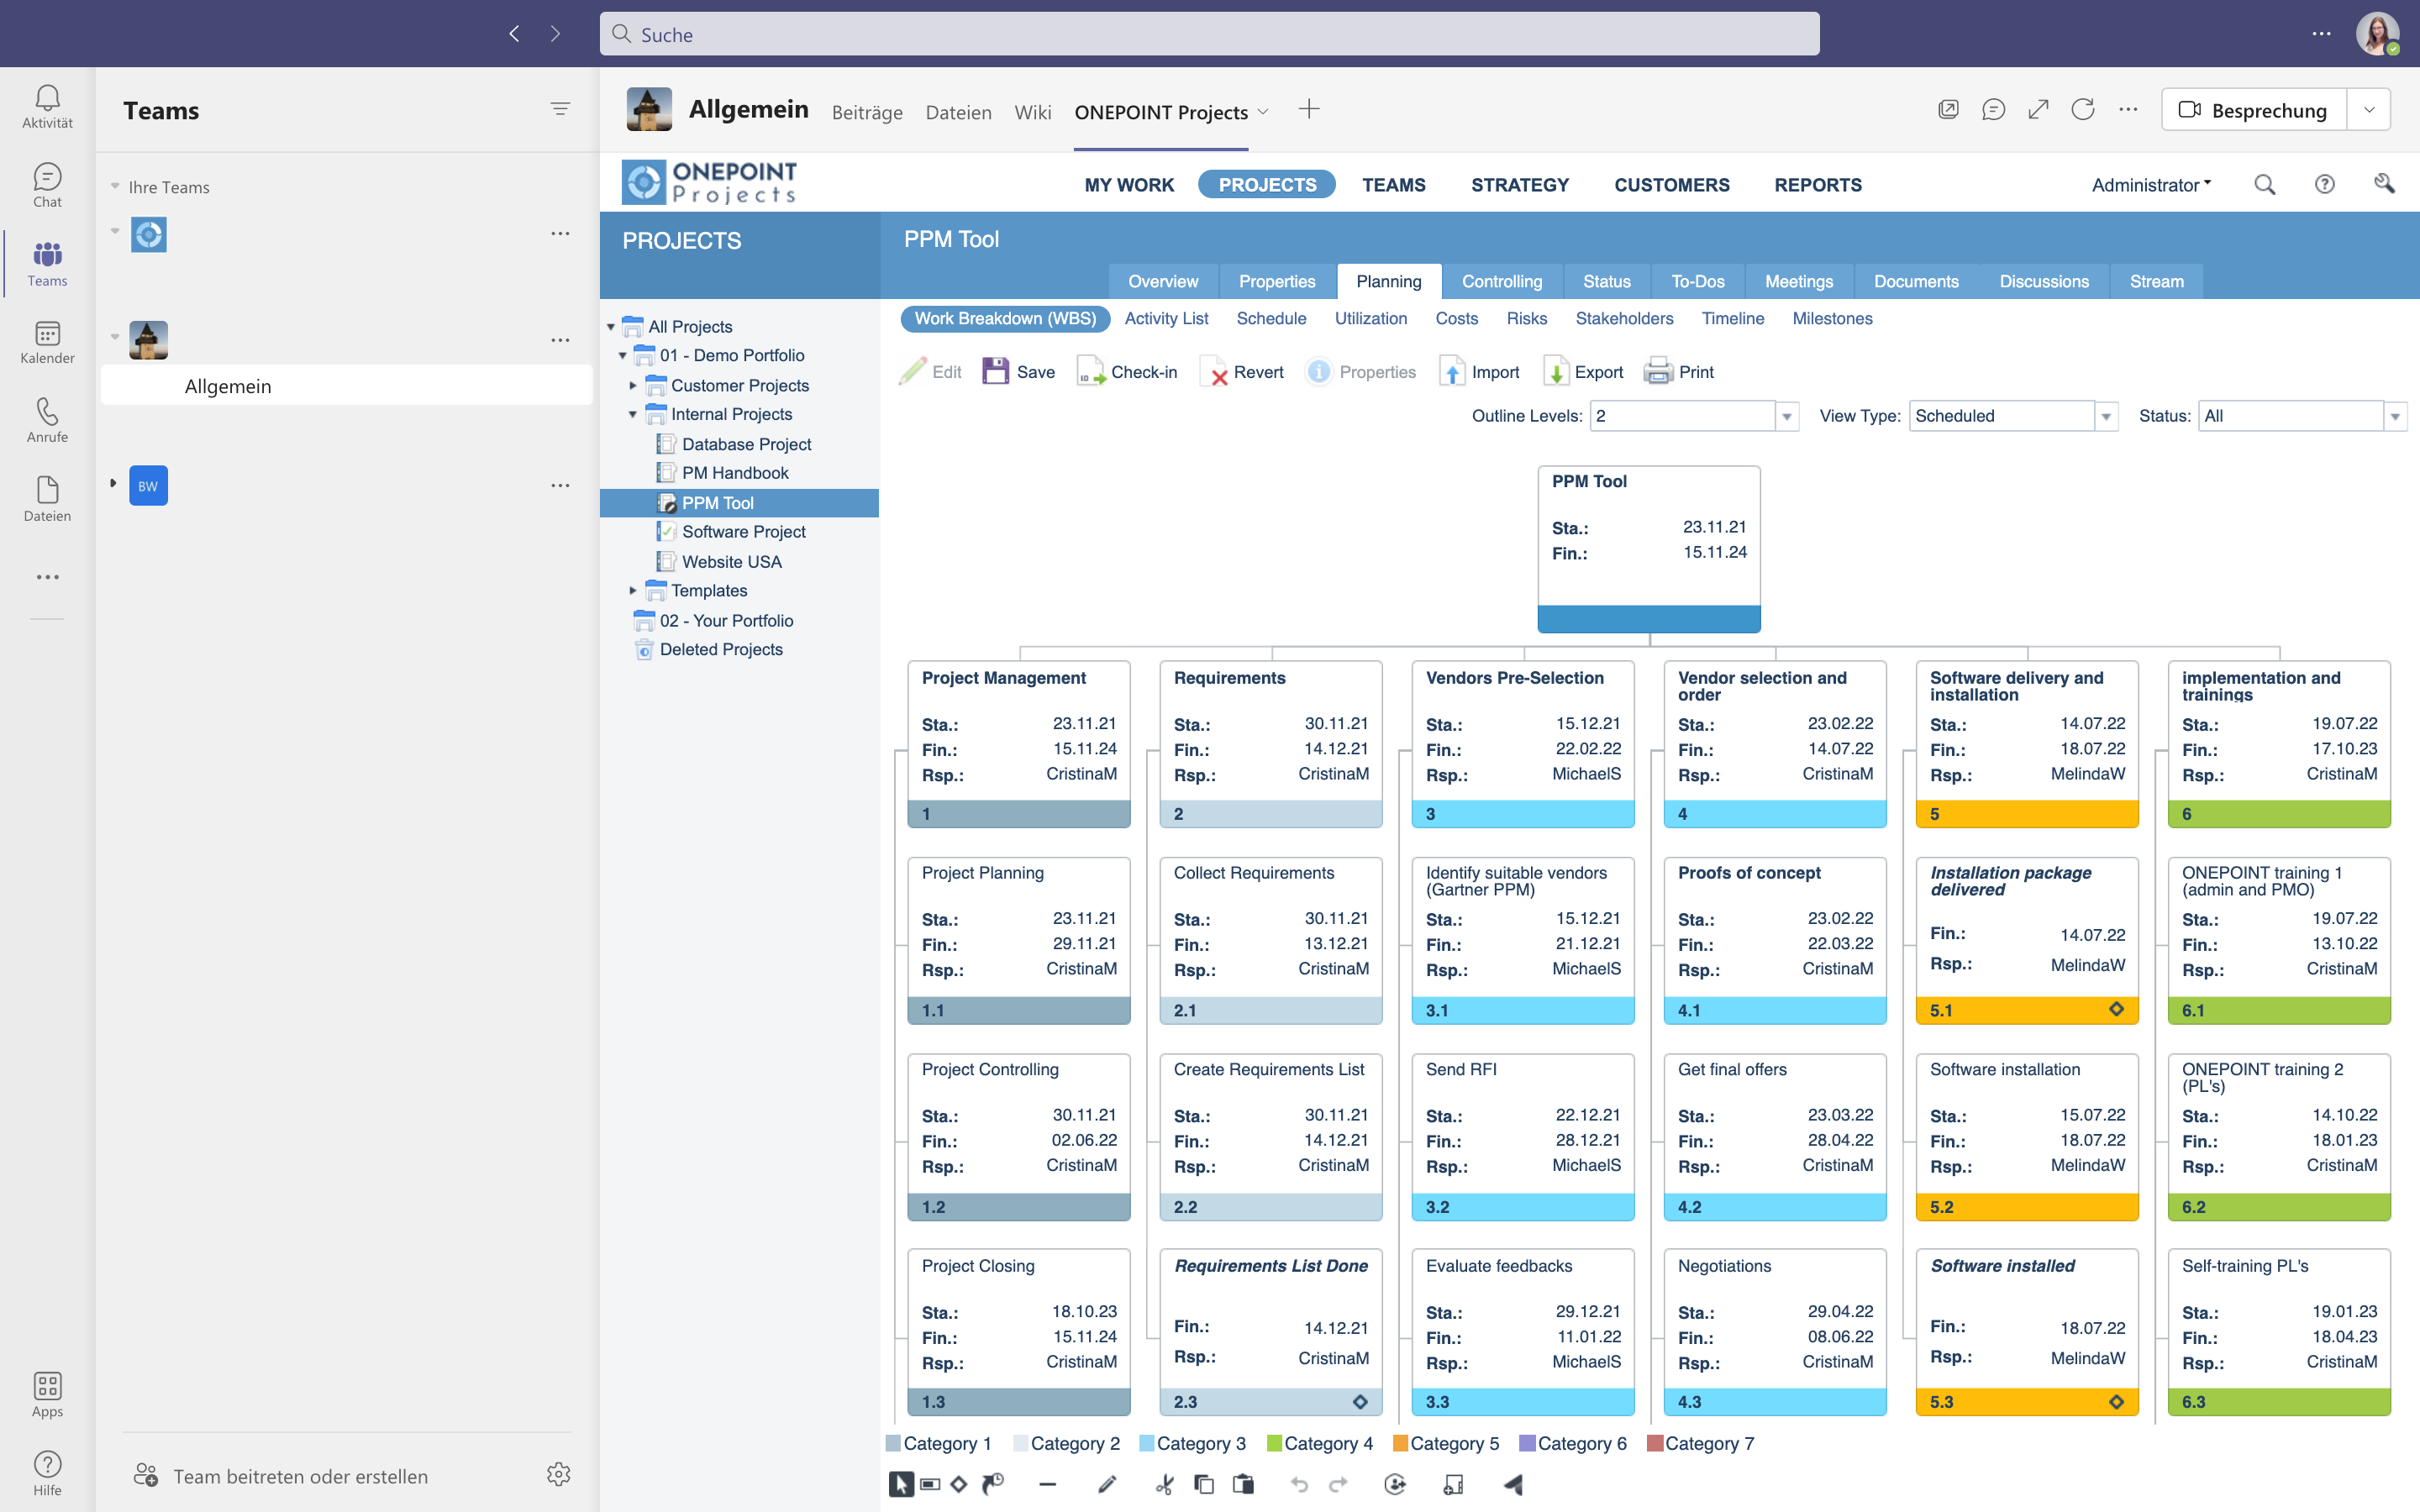 Microsoft Teams Integration by ONEPOINT Projects